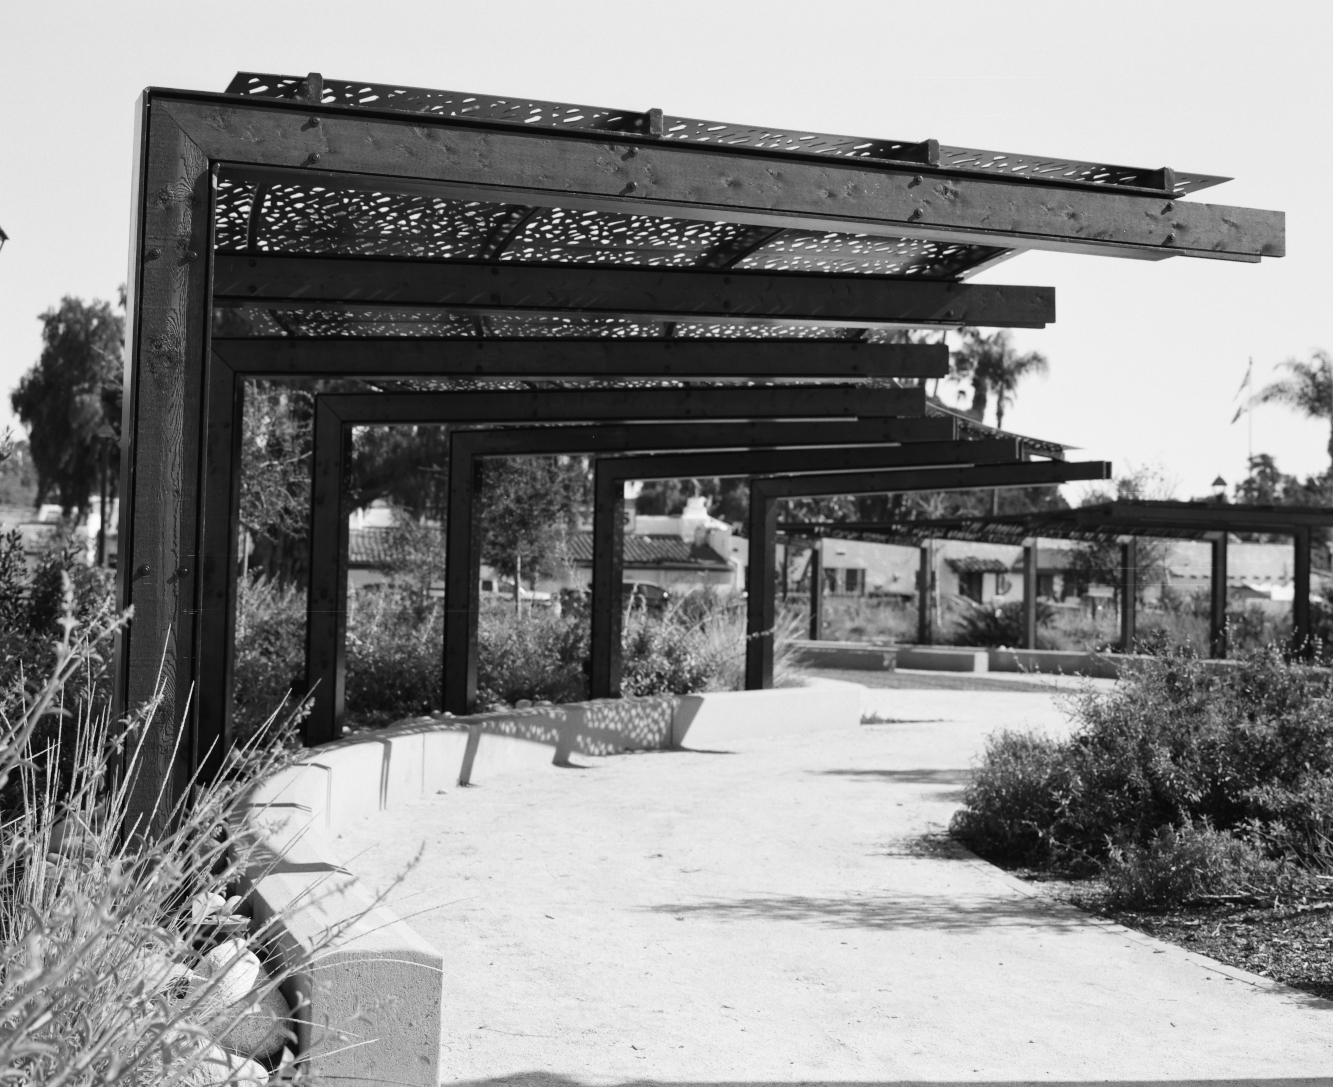 Black and white medium format film photograph of the park in Old Town San Diego.